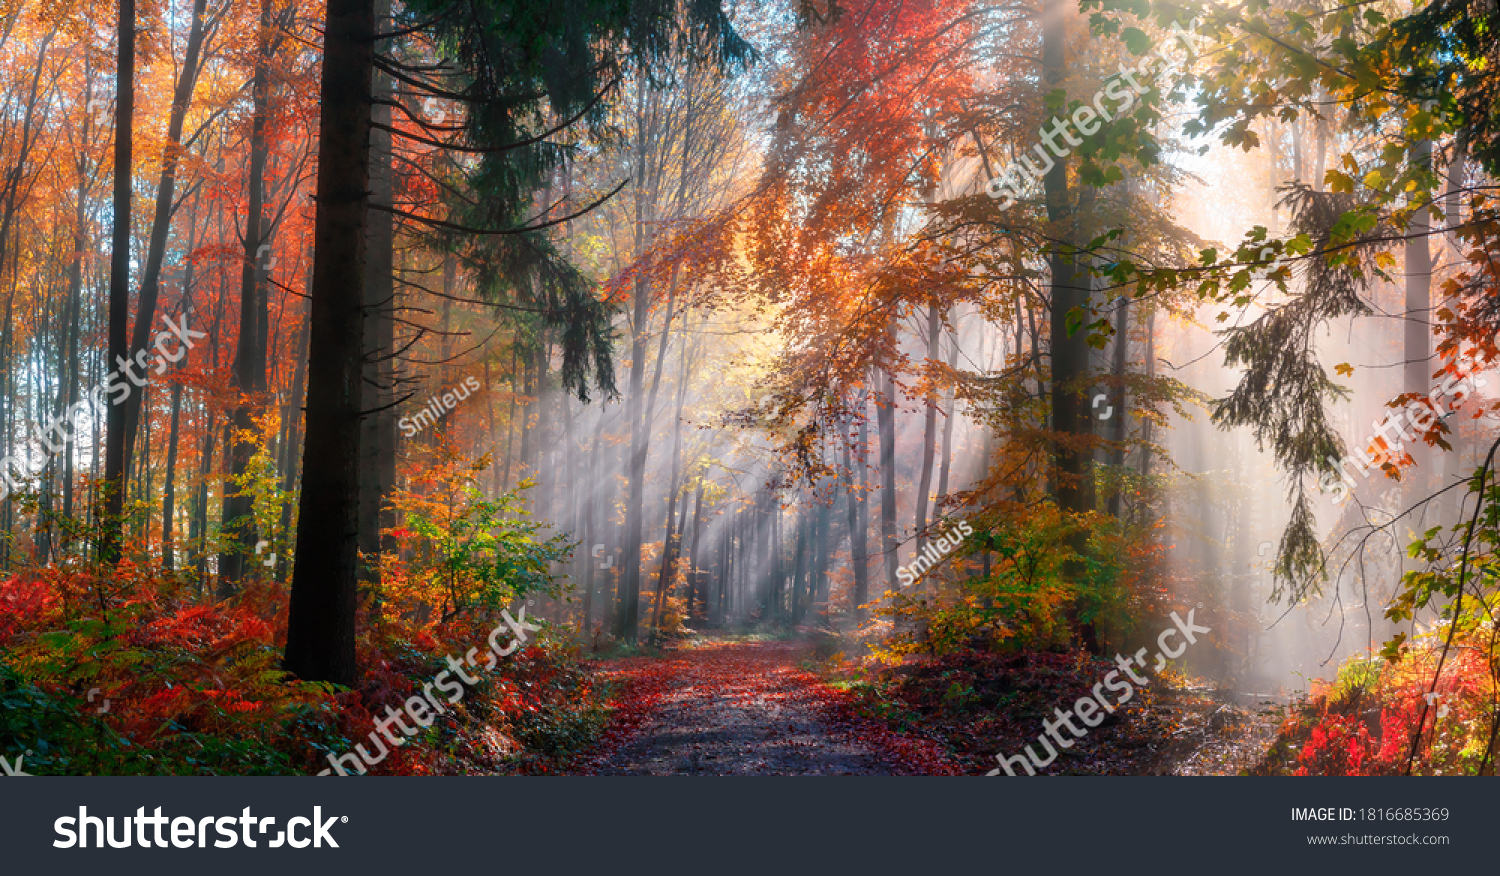 Magical autumn scenery in a dreamy forest, with rays of sunlight beautifully illuminating the wafts of mist and painting stunning colors into the trees #1816685369